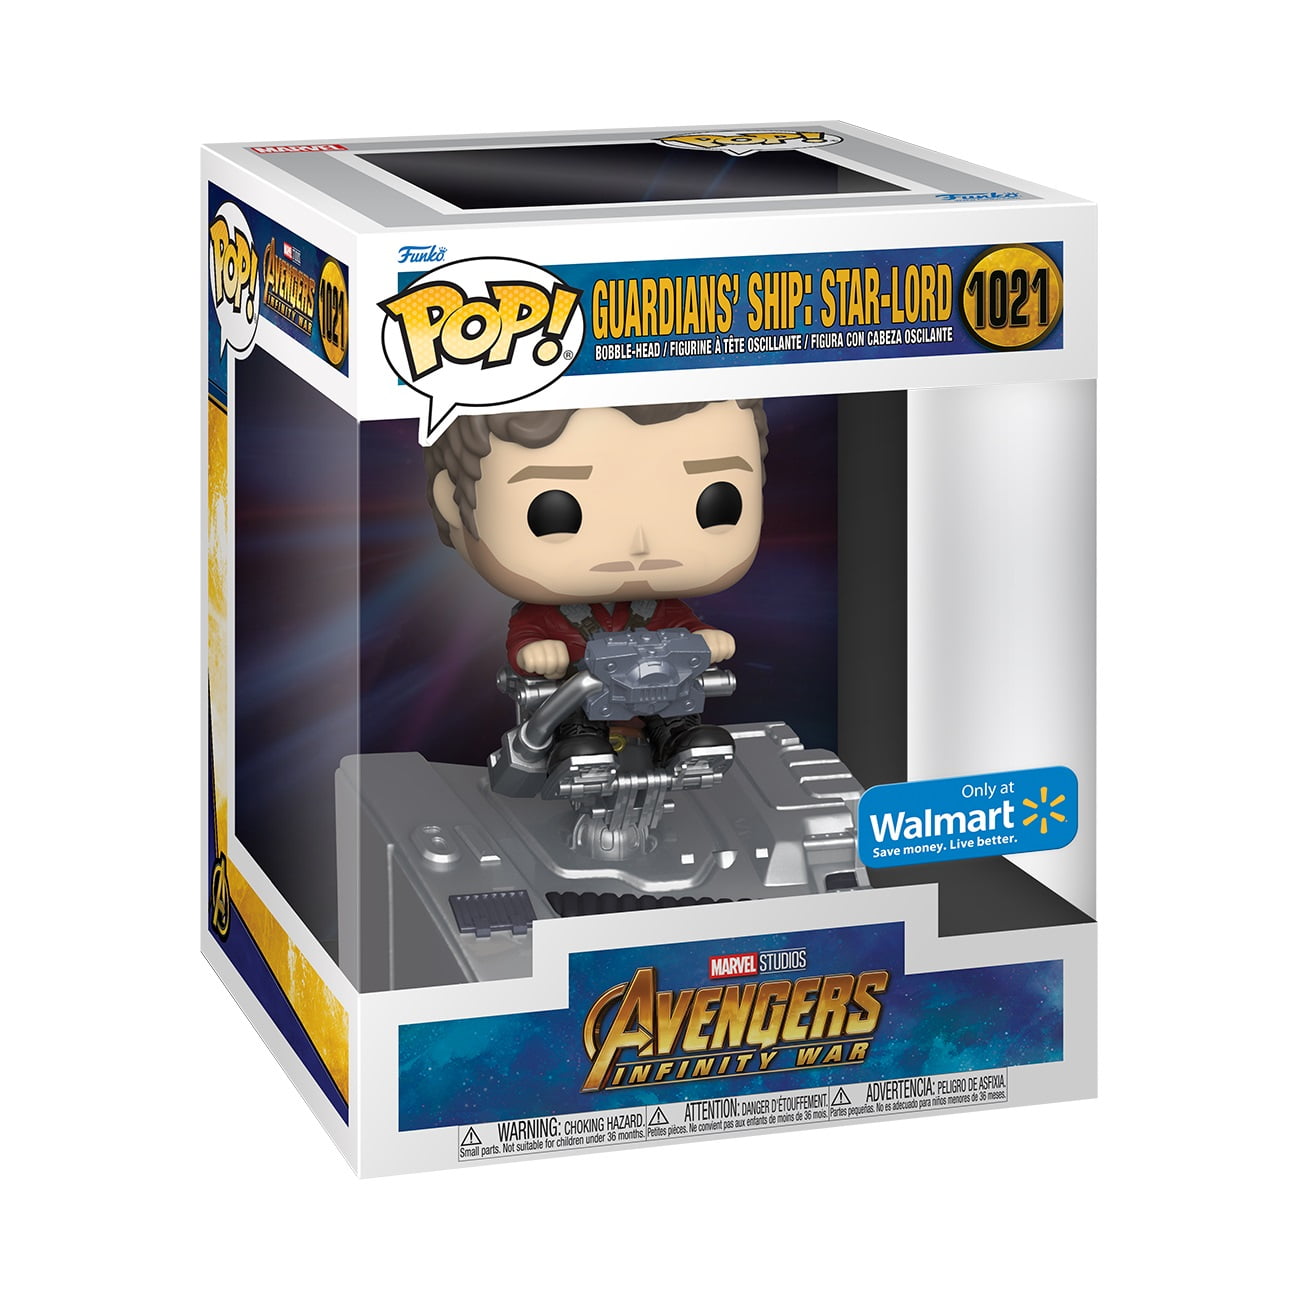 automat Ni Trickle Funko Pop! Deluxe Set: Marvel - Guardians of the Galaxy - Star-Lord in  Guardian's Ship Vinyl Bobblehead (1 of 6 Figures) (Walmart Exclusive) -  Walmart.com